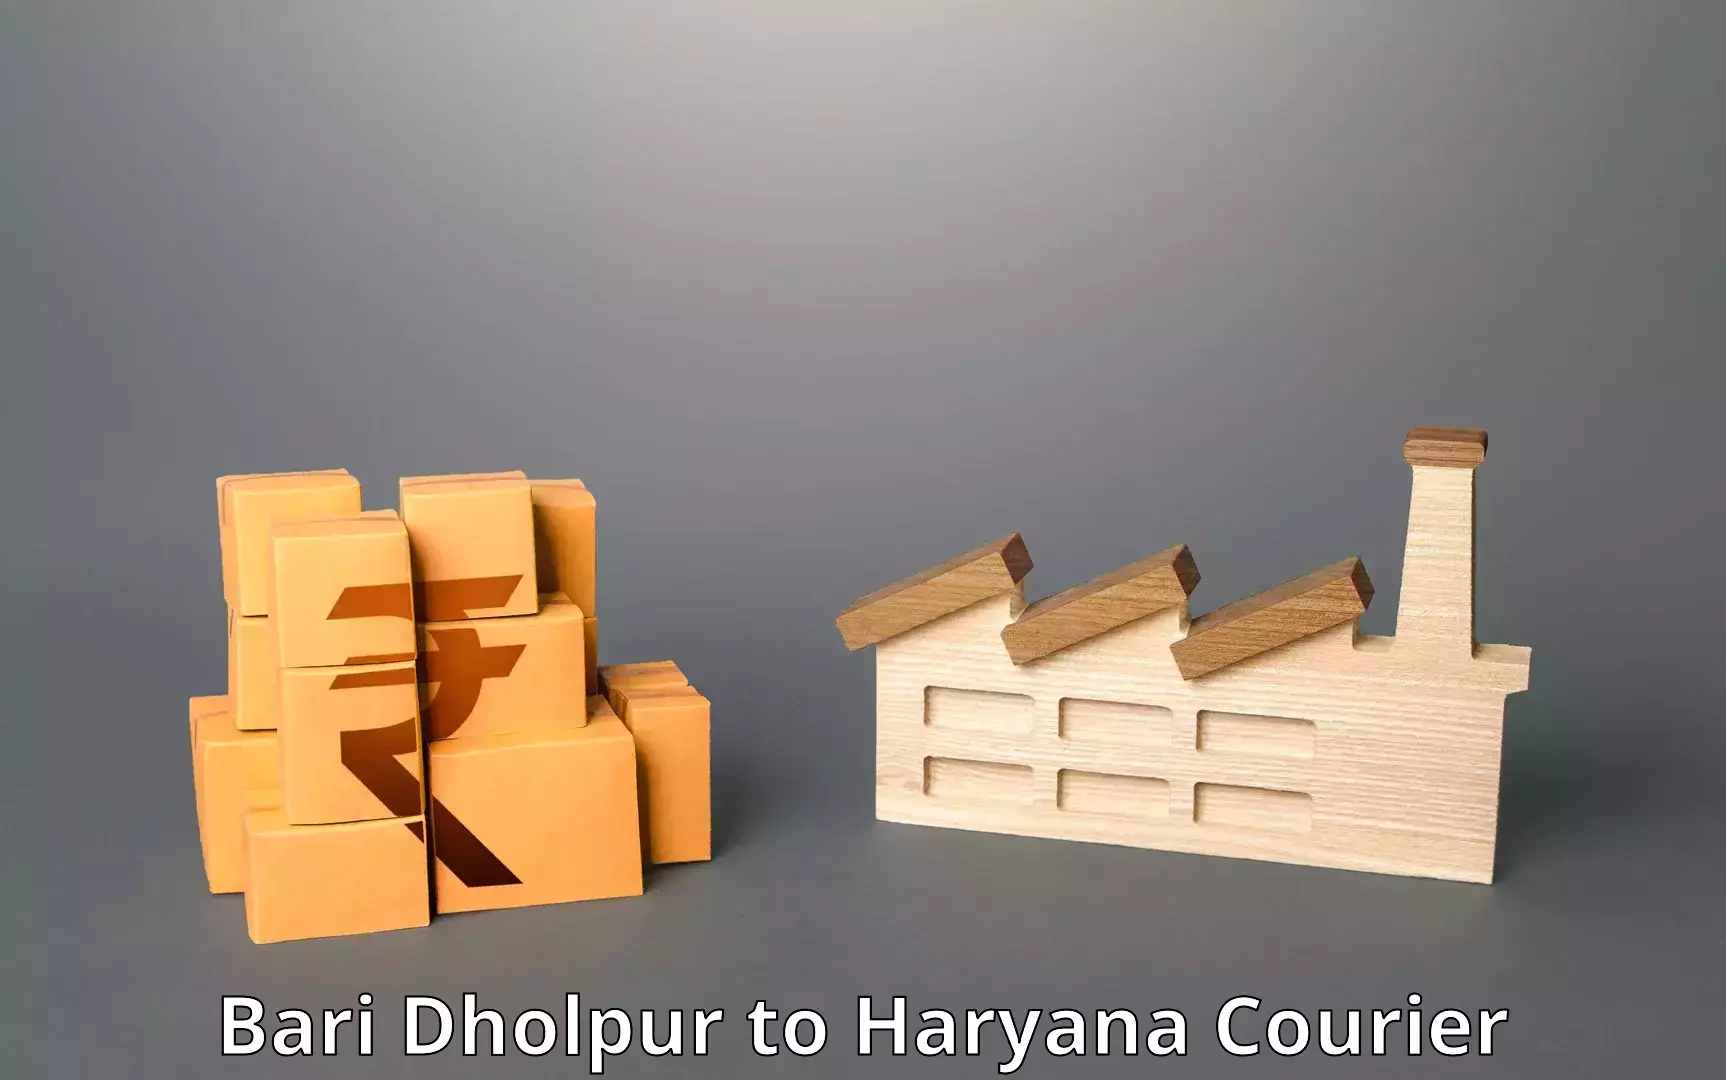 Next day courier Bari Dholpur to NCR Haryana